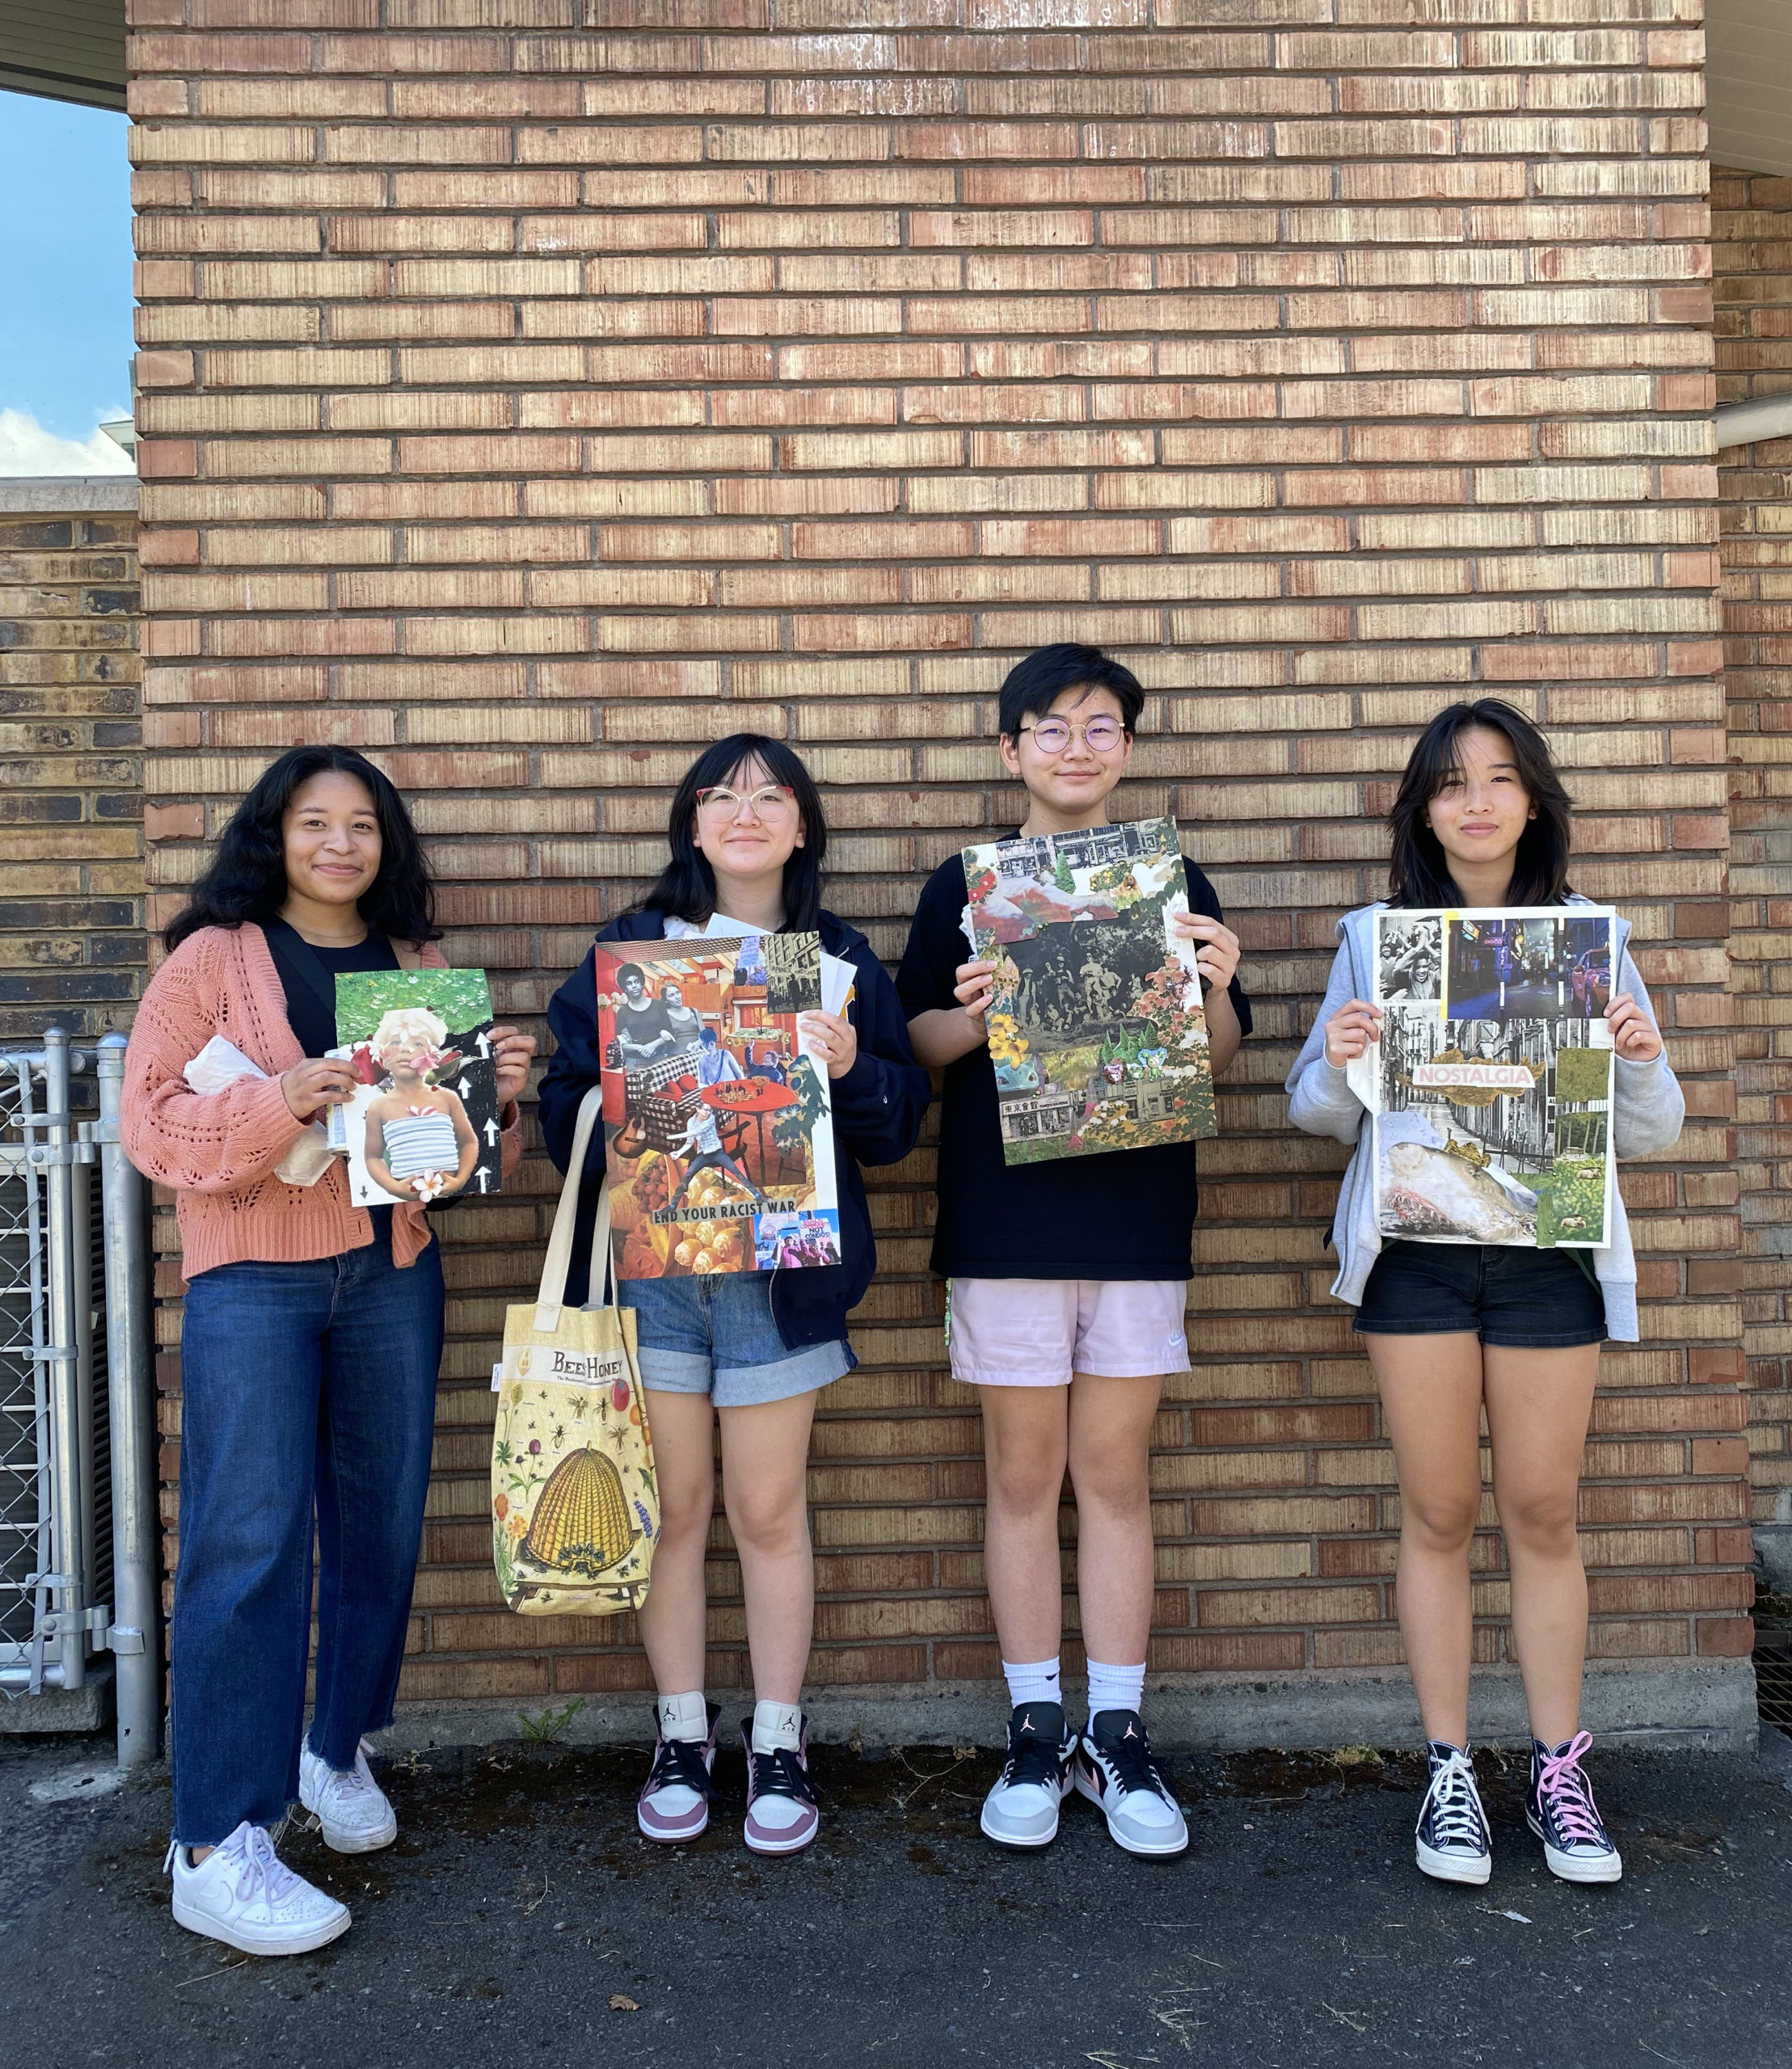 Four teens standing against a brick wall outside the Densho building holding collages they made inspired by Gidra.